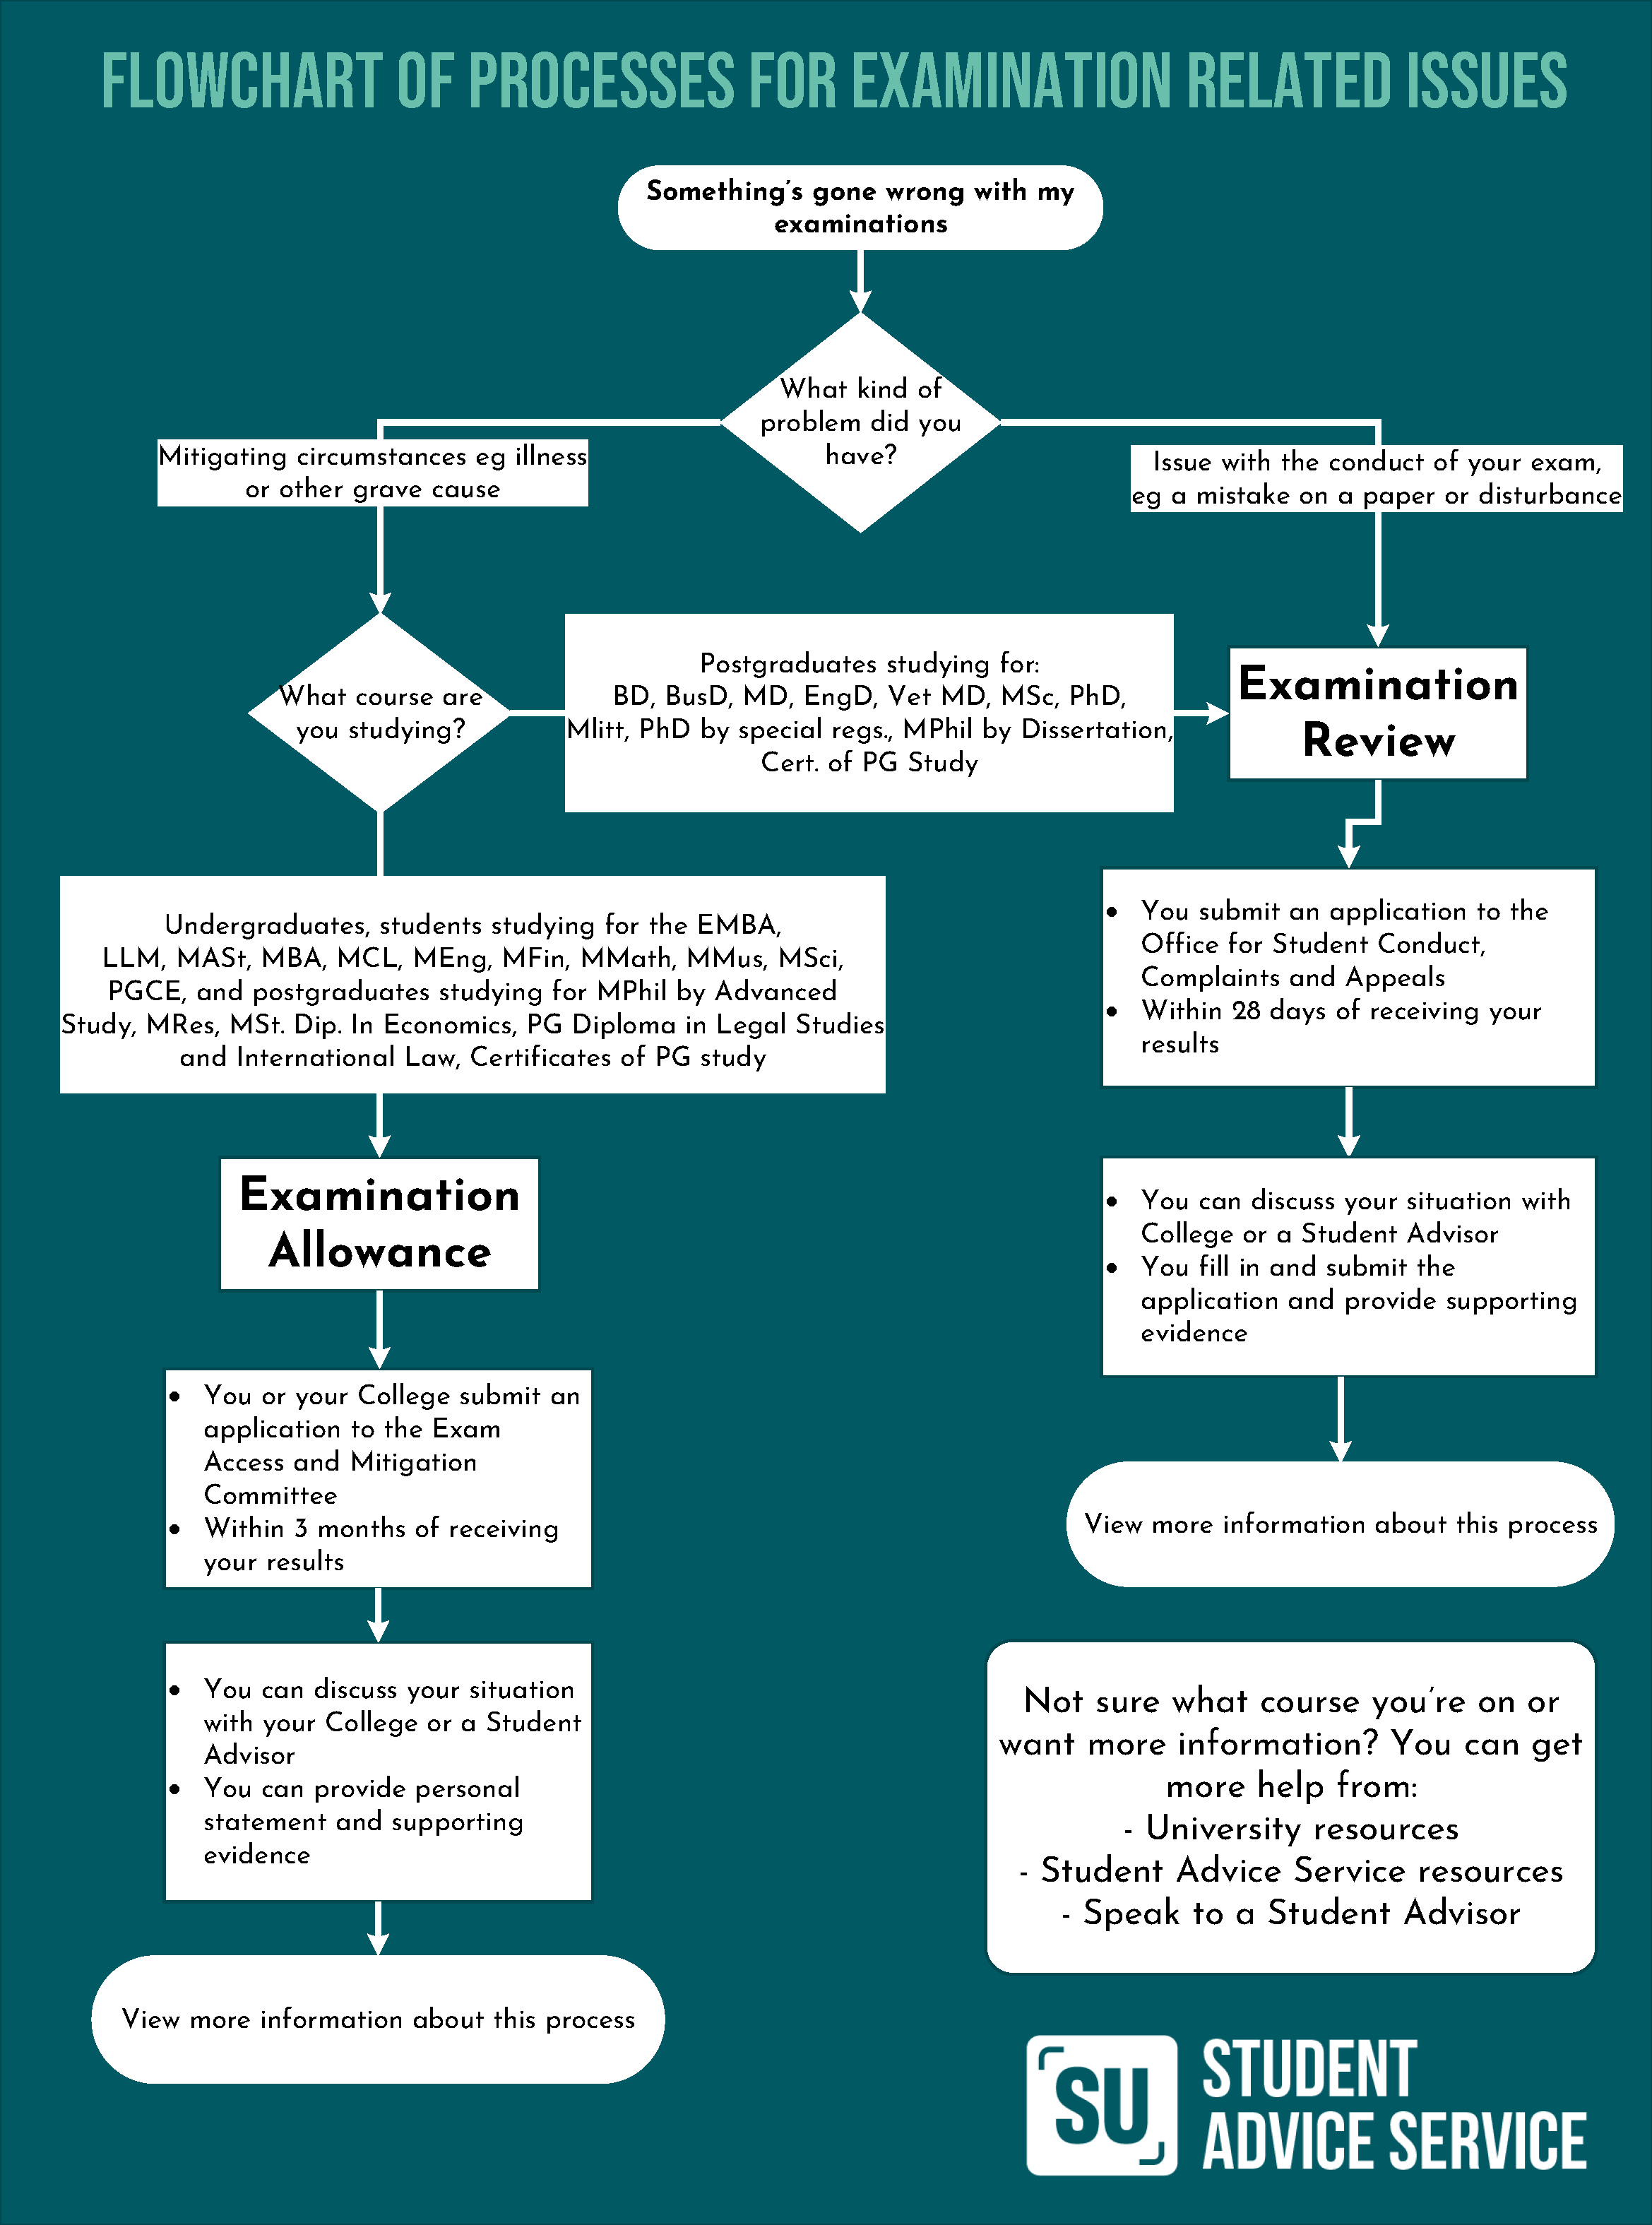 click title for screen readable pdf of flowchart